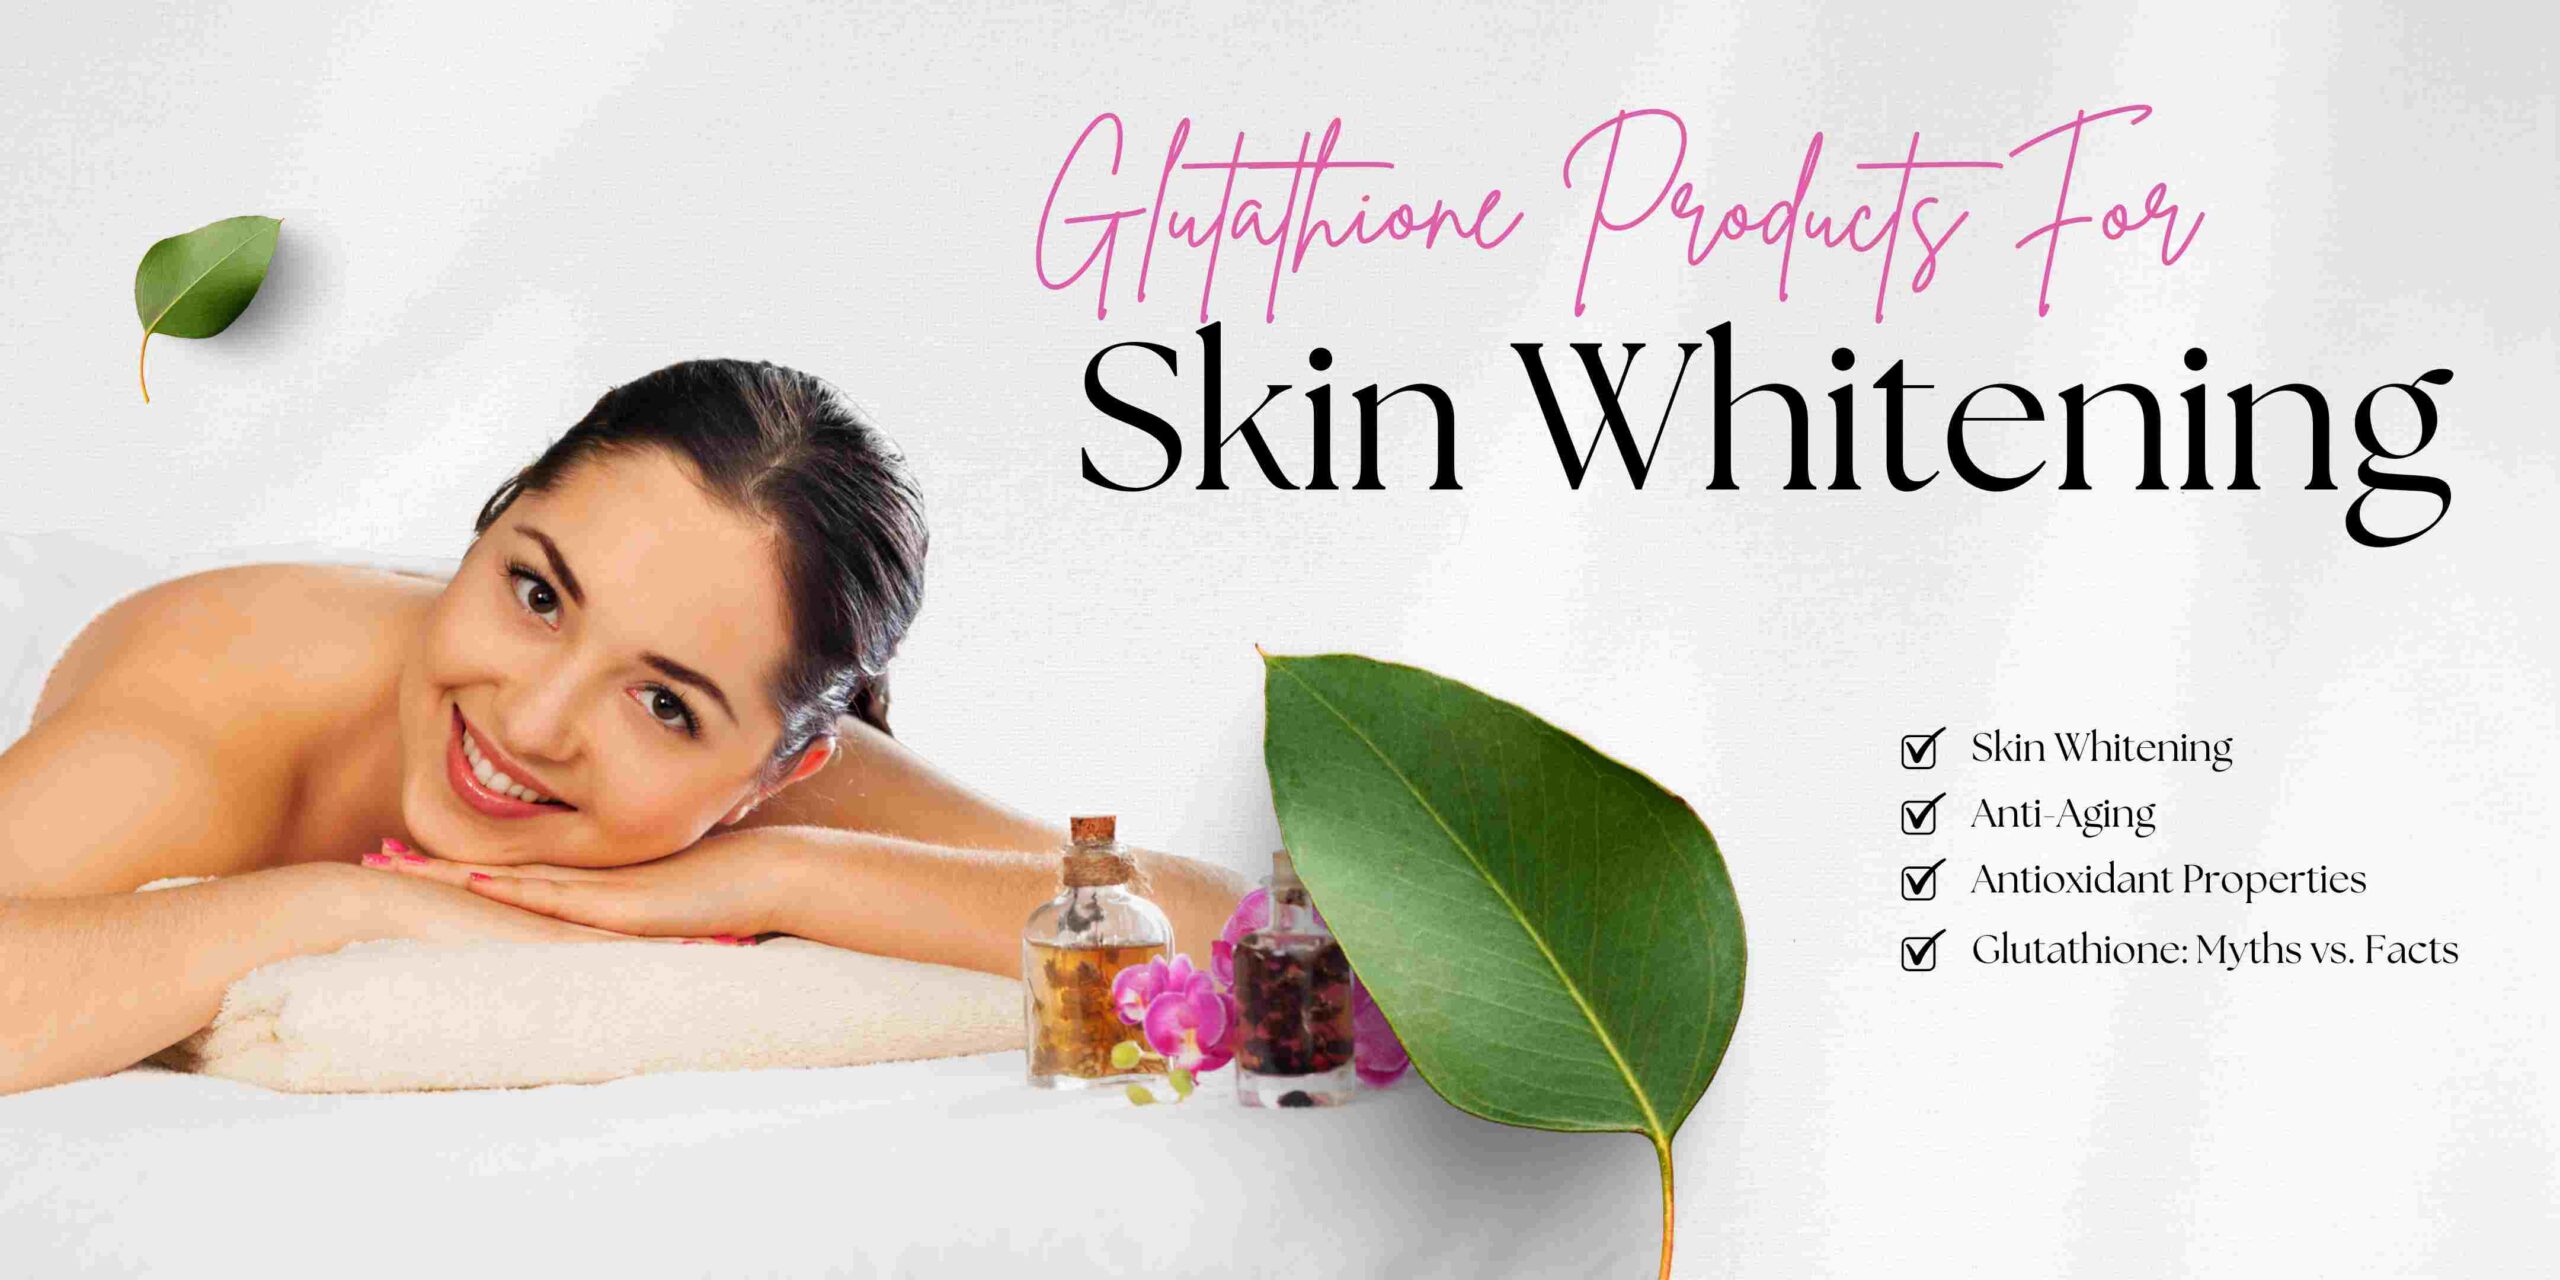 Glutathione Products For Skin Whitening